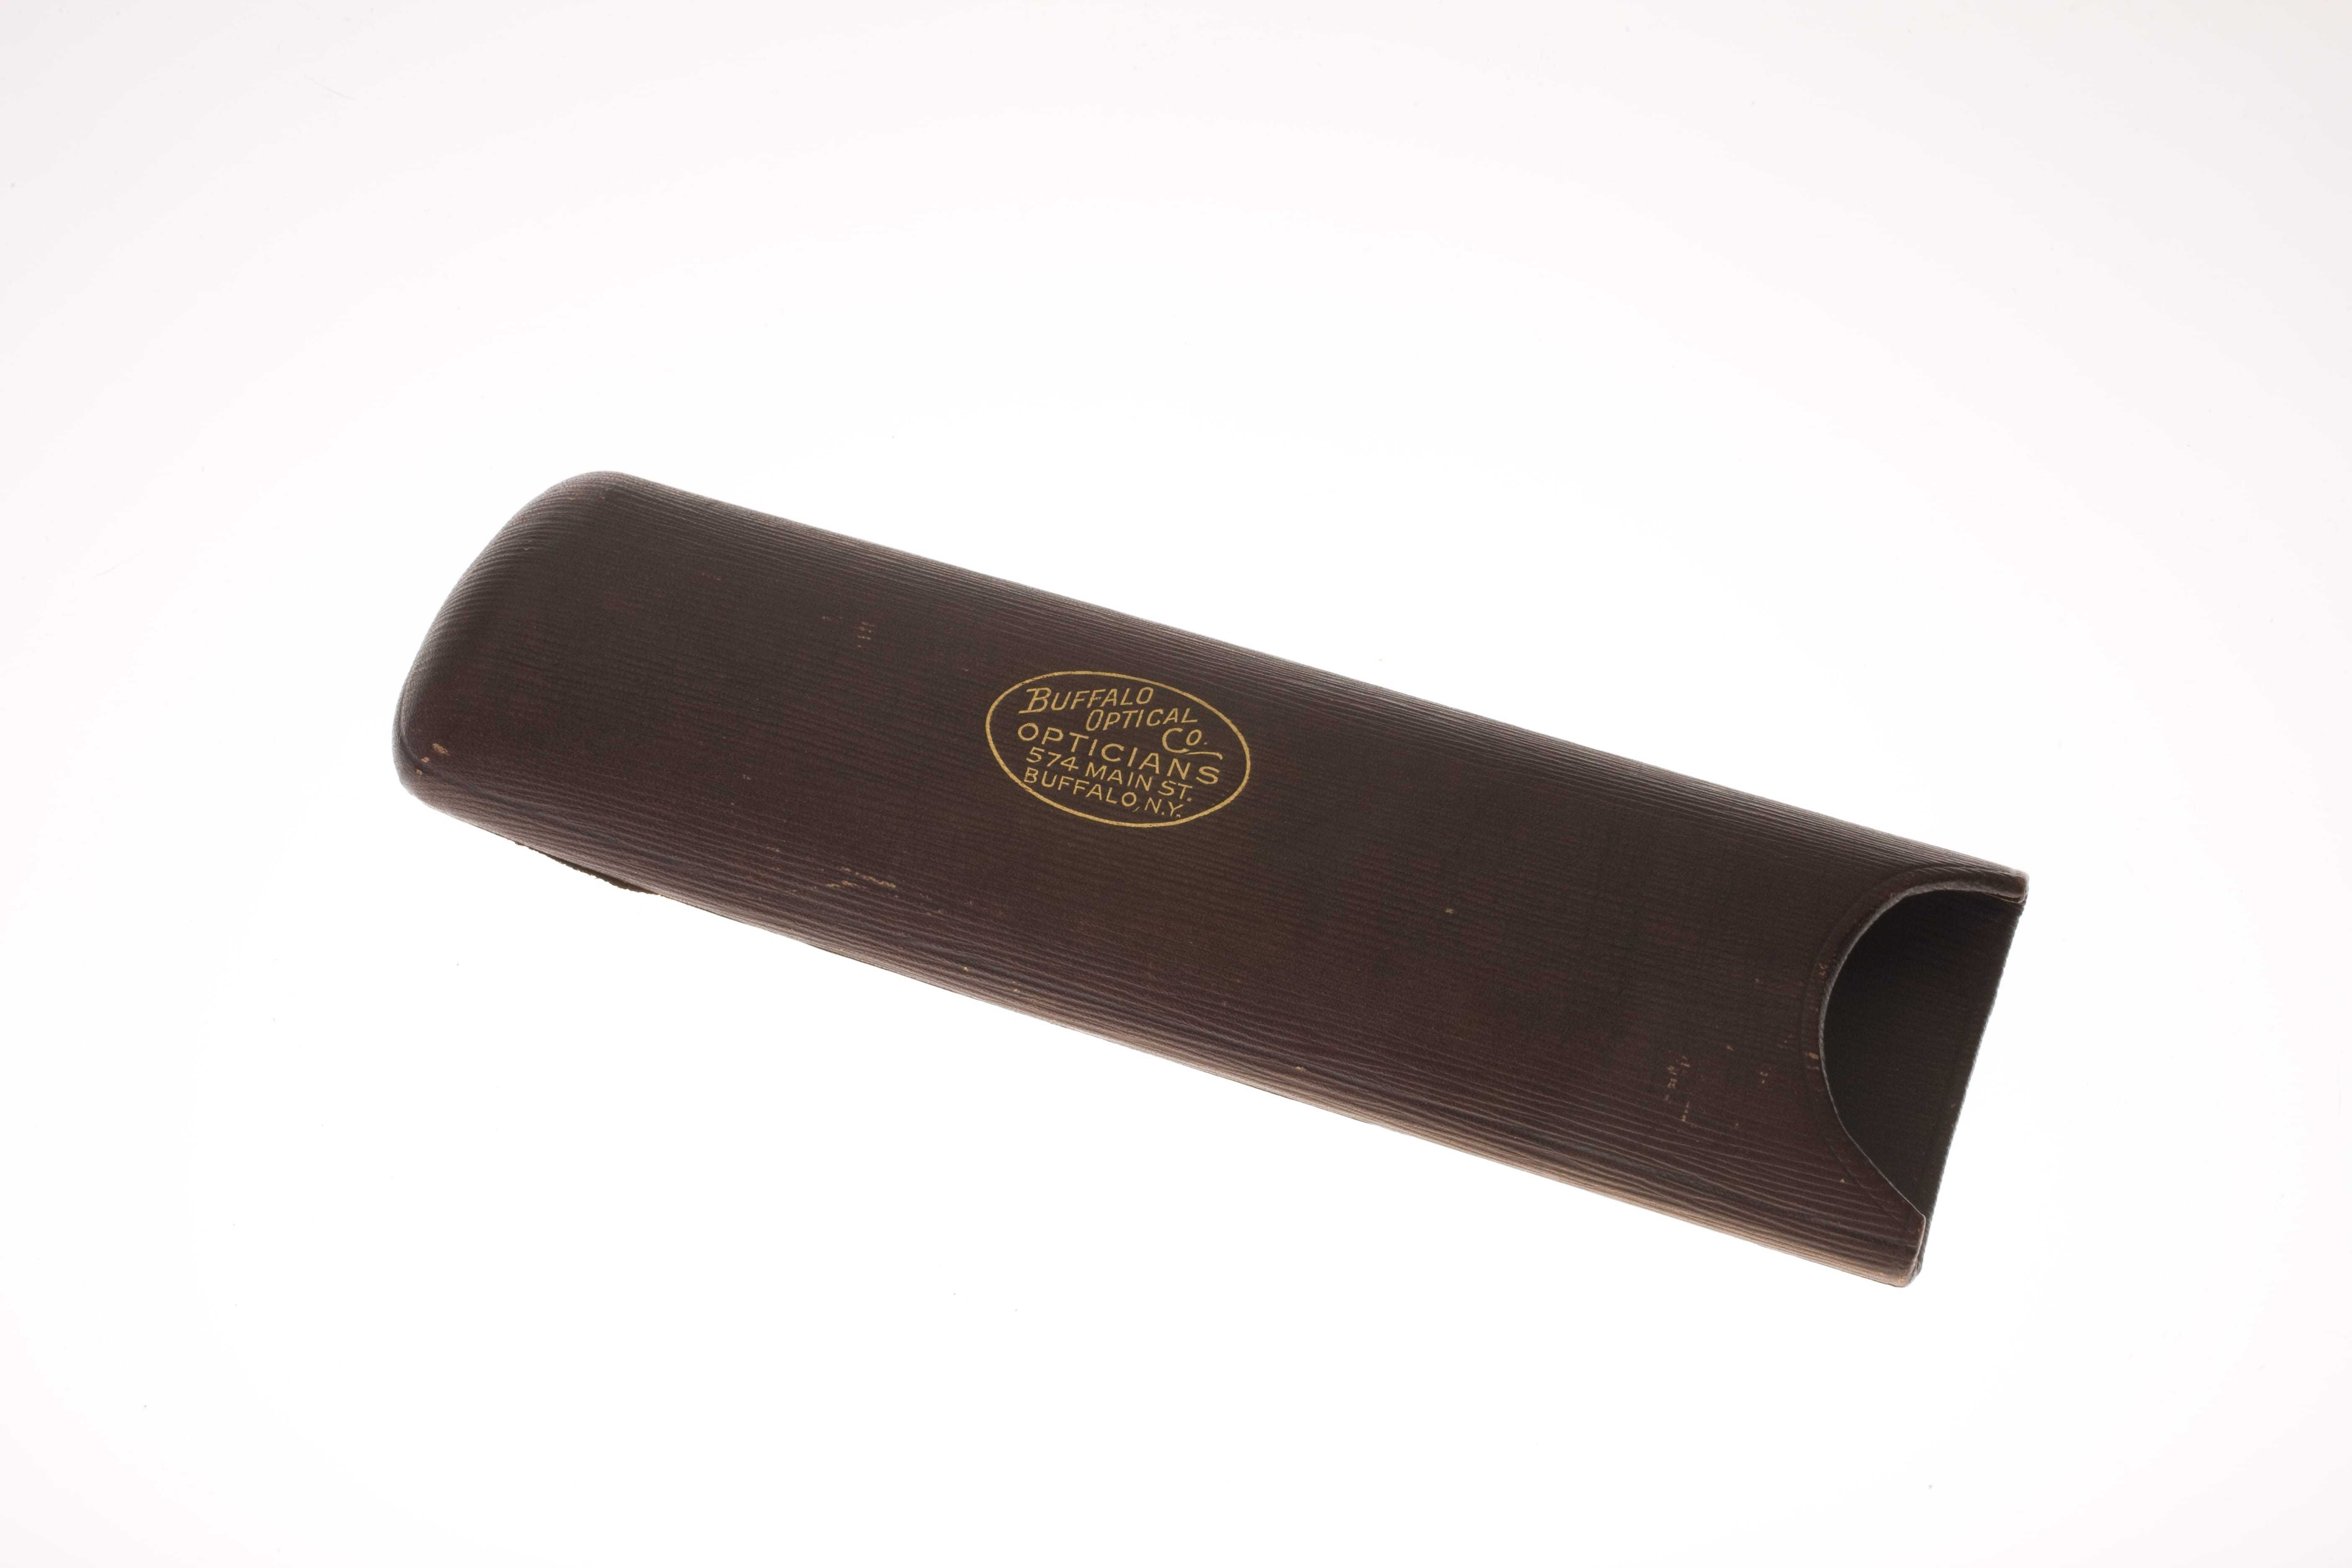 A brown eyeglasses case with the Buffalo Optical Co